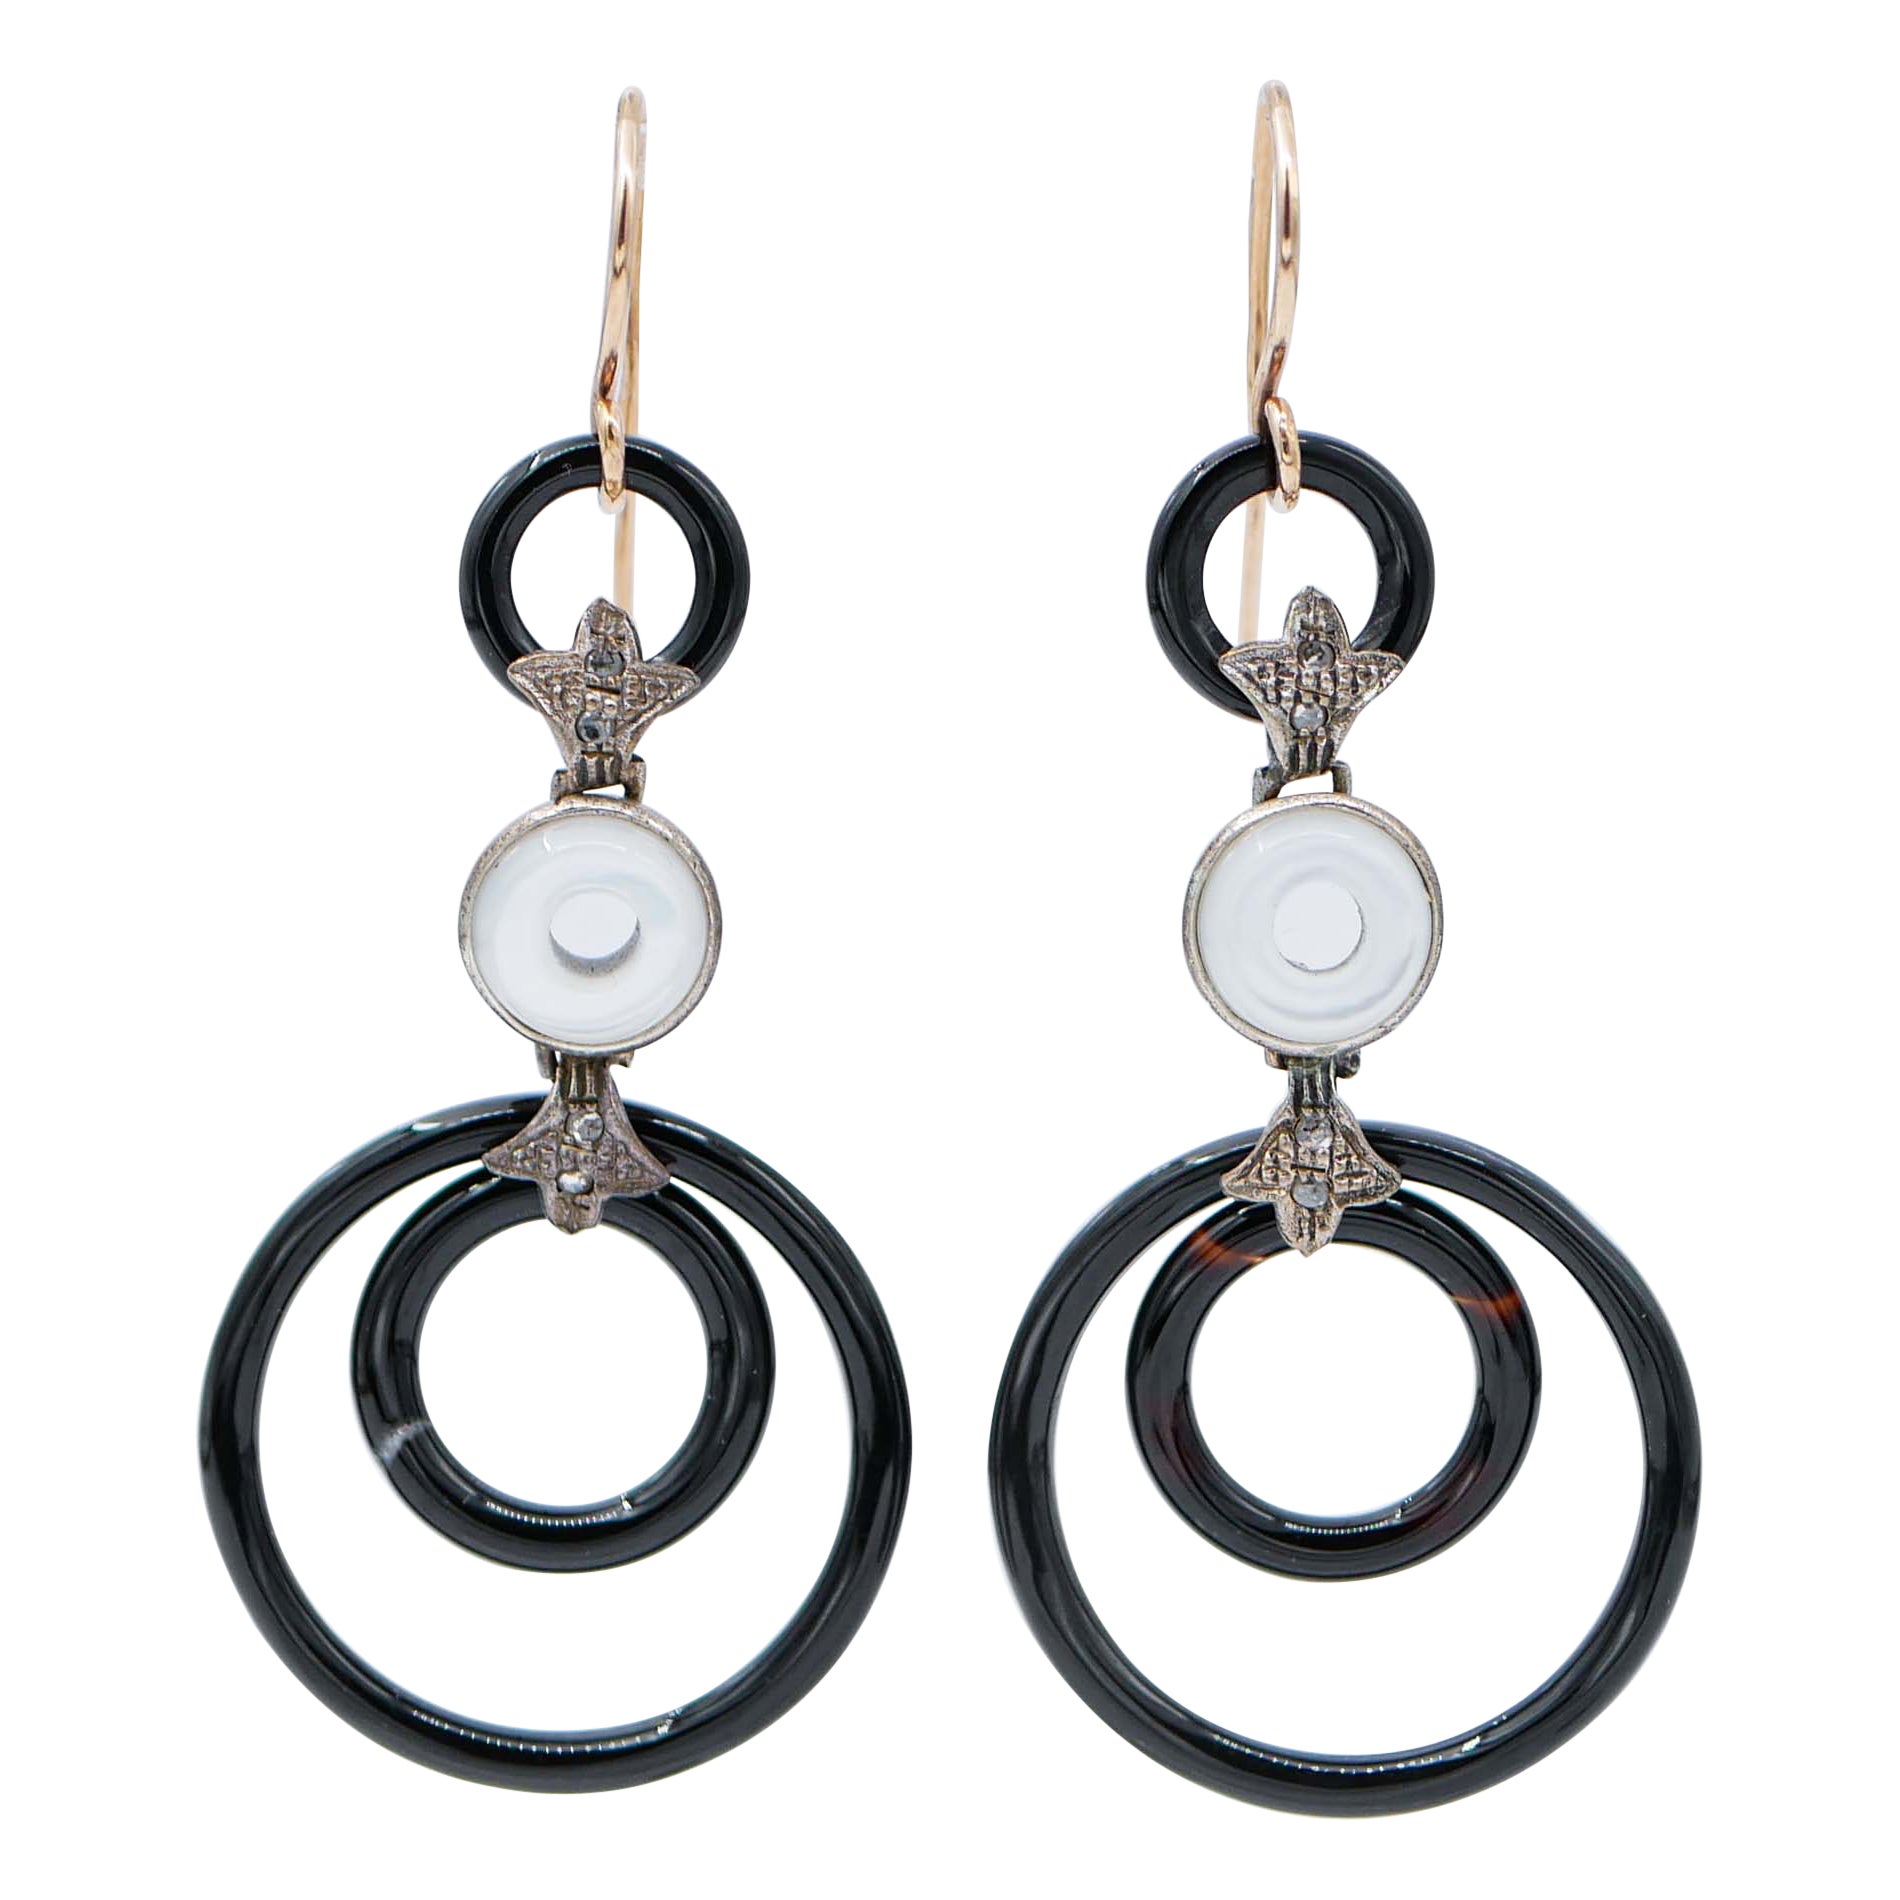 Diamonds, White Stones, Onyx, Rose Gold and Silver Dangle Earrings